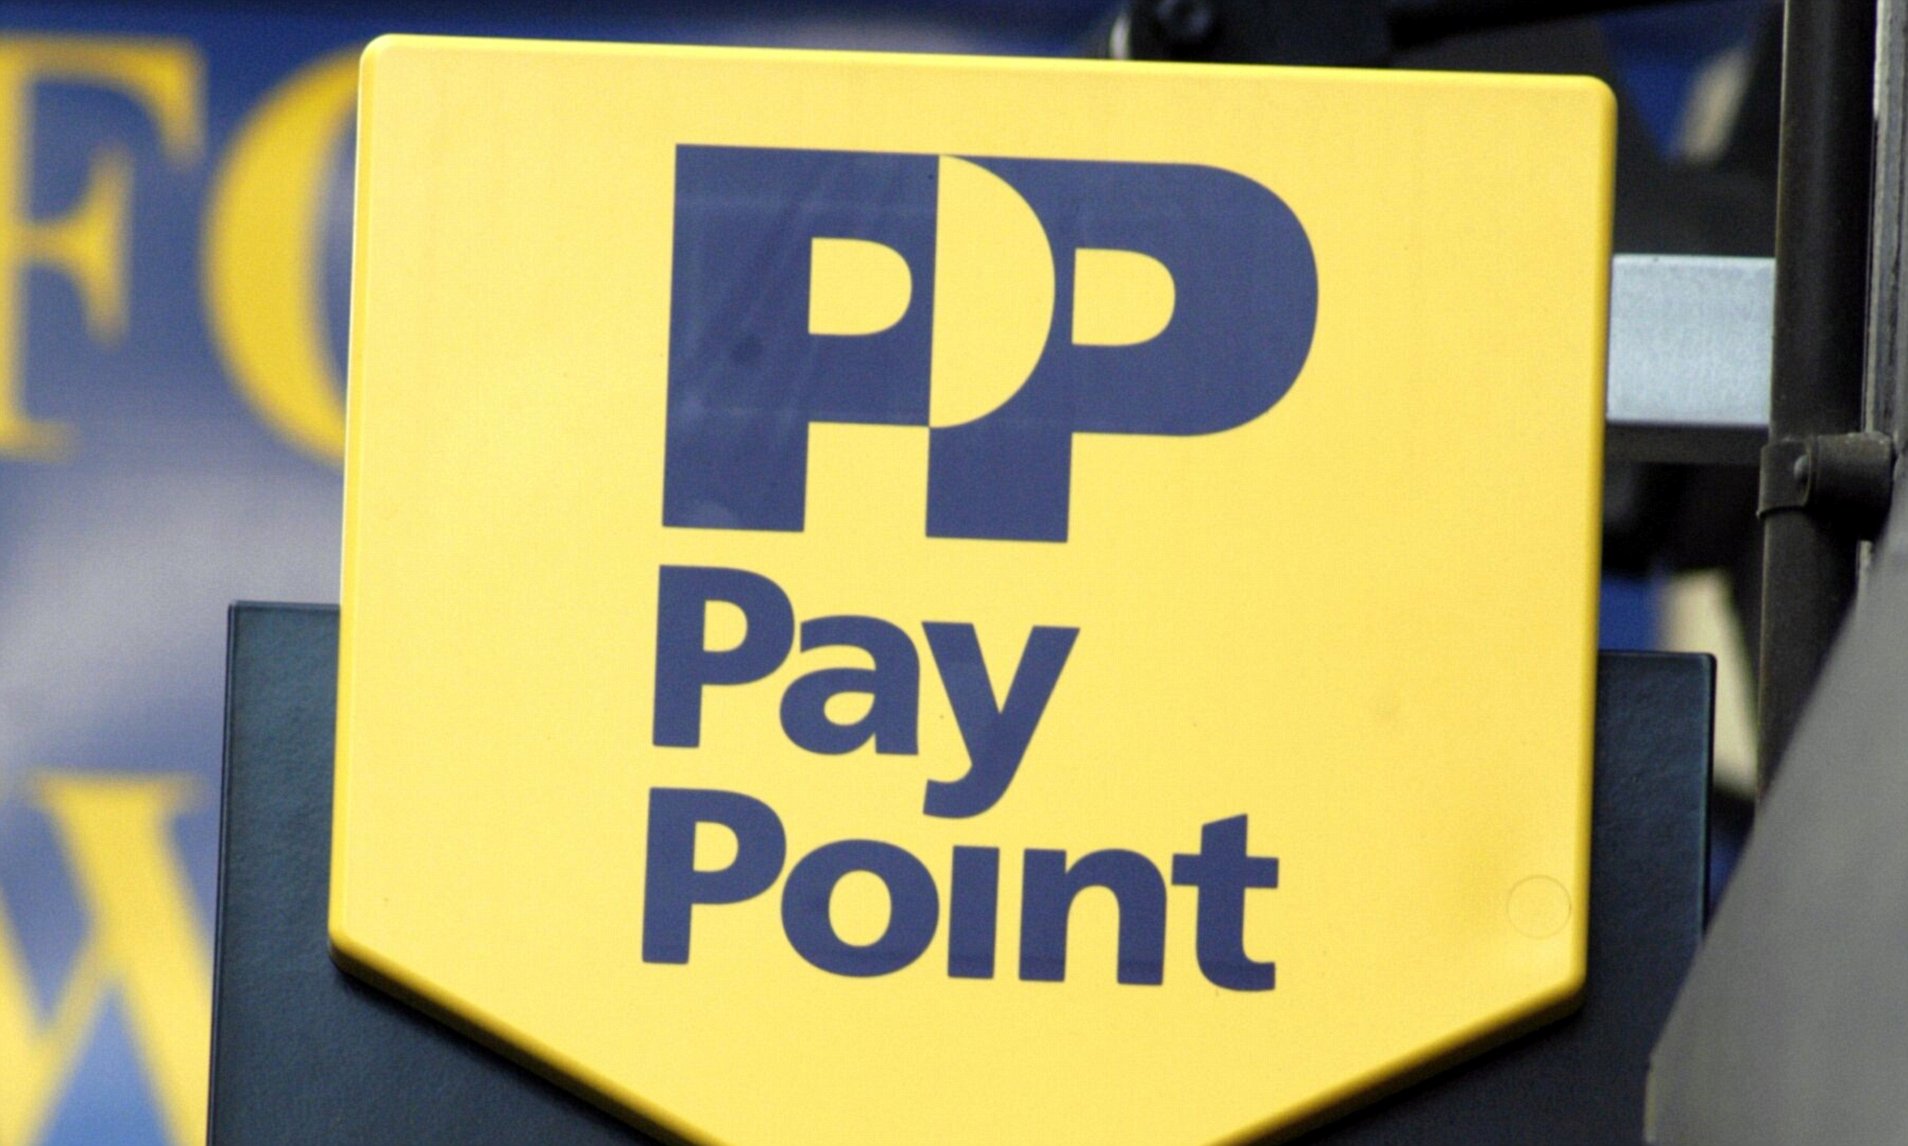 Pay point image.jpg